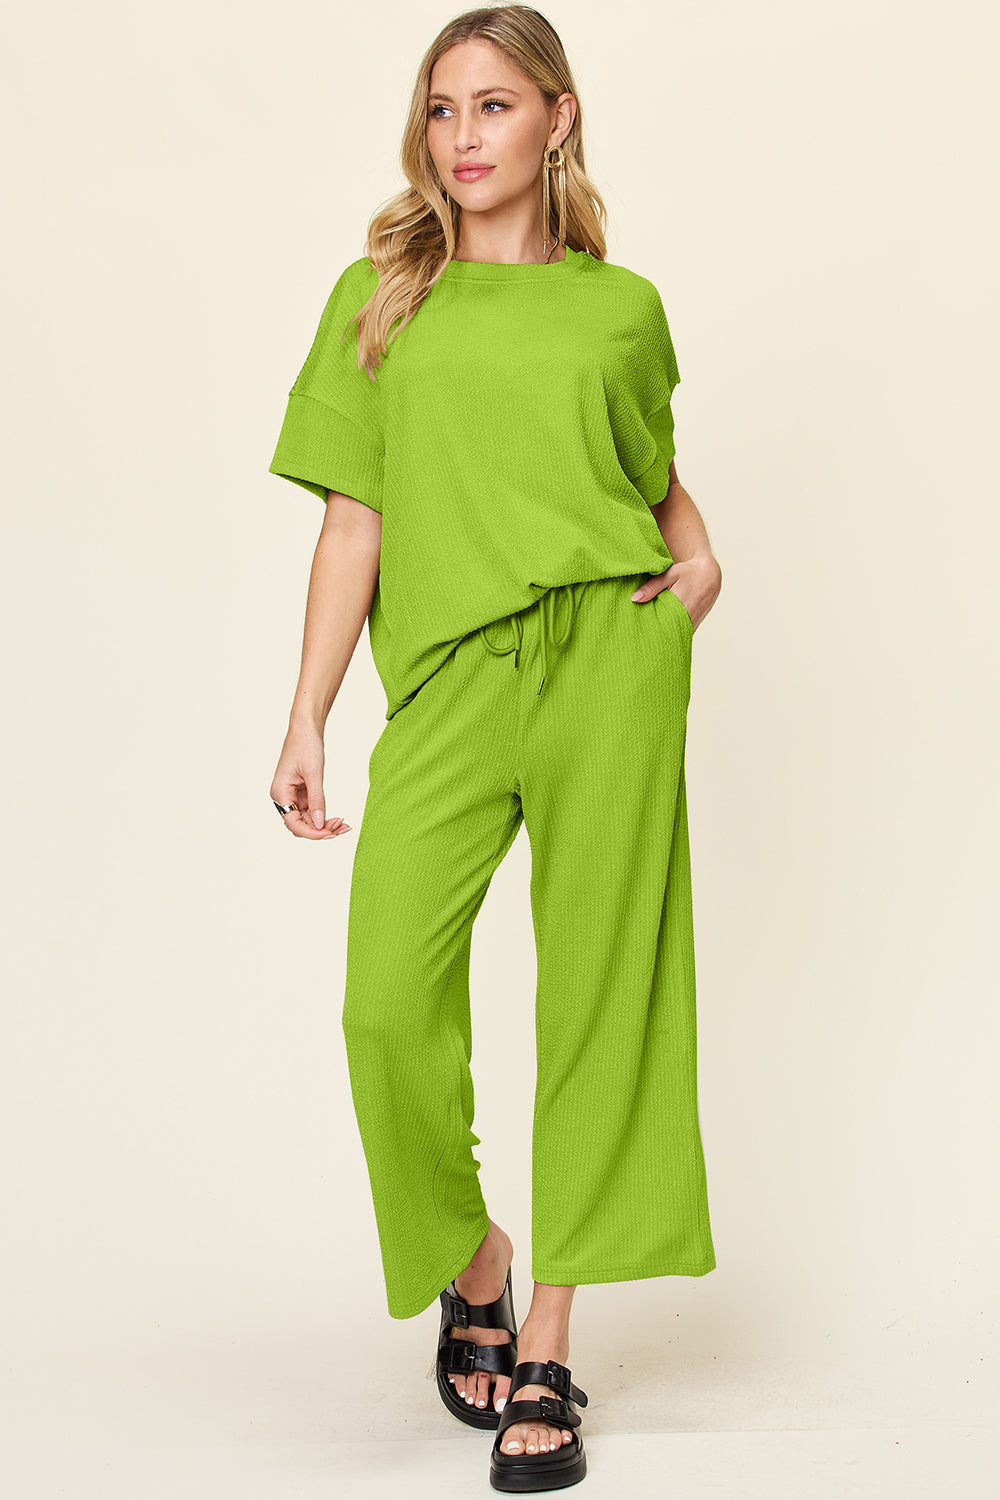 Textured Knit Top and Wide Leg Pant Set Lime